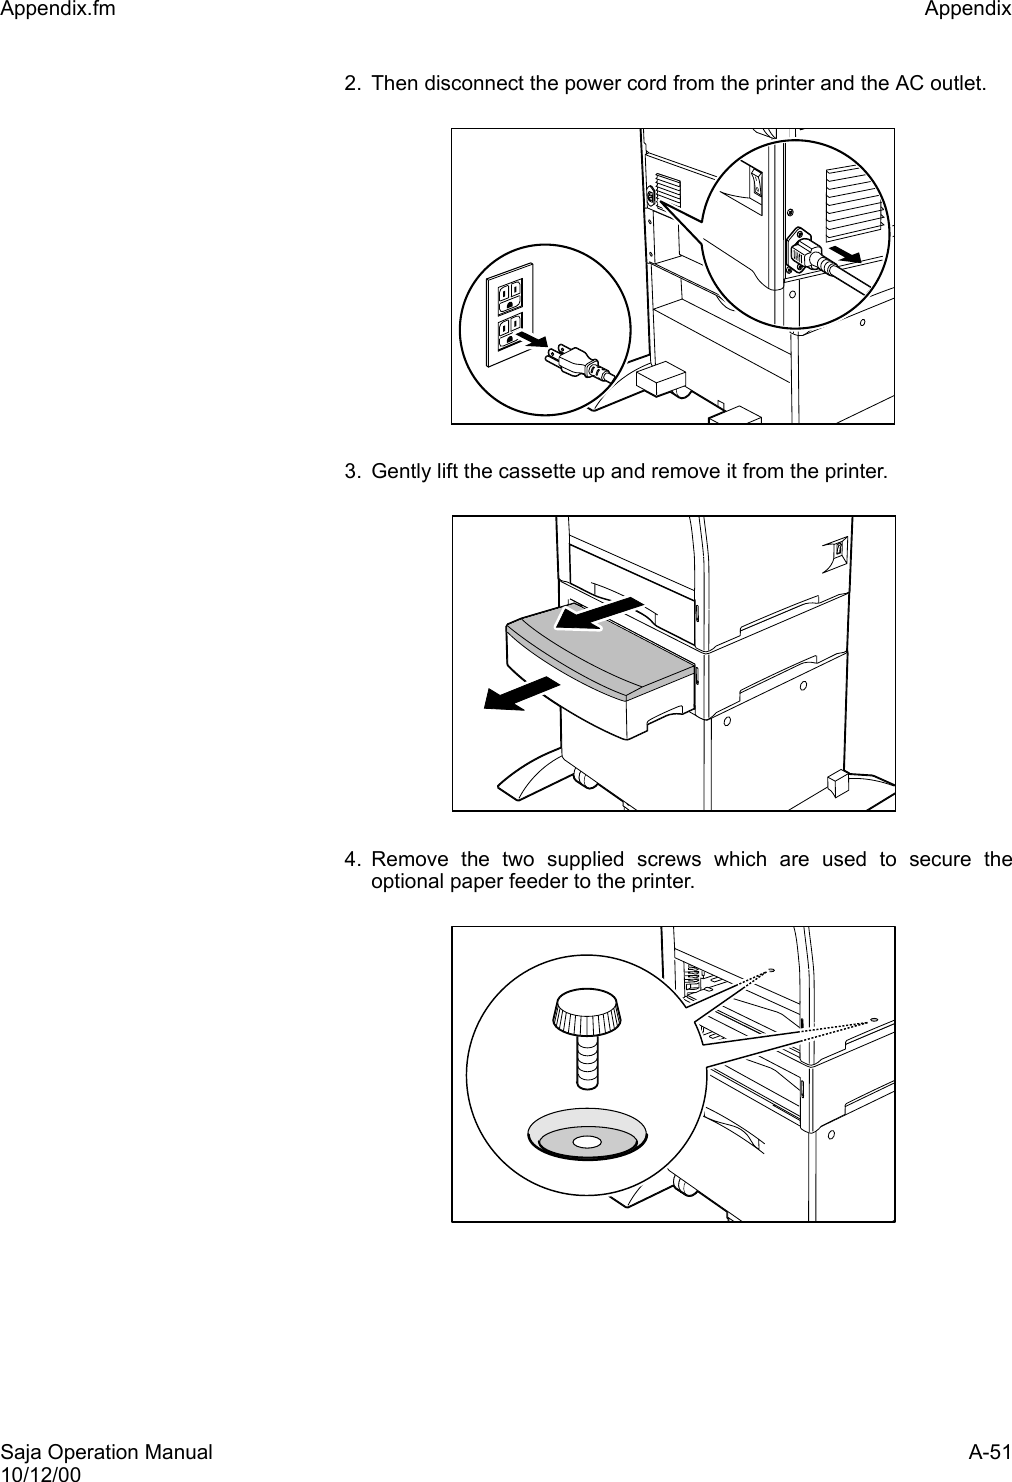 Saja Operation Manual A-5110/12/00Appendix.fm Appendix 2. Then disconnect the power cord from the printer and the AC outlet.3. Gently lift the cassette up and remove it from the printer.4. Remove the two supplied screws which are used to secure theoptional paper feeder to the printer.